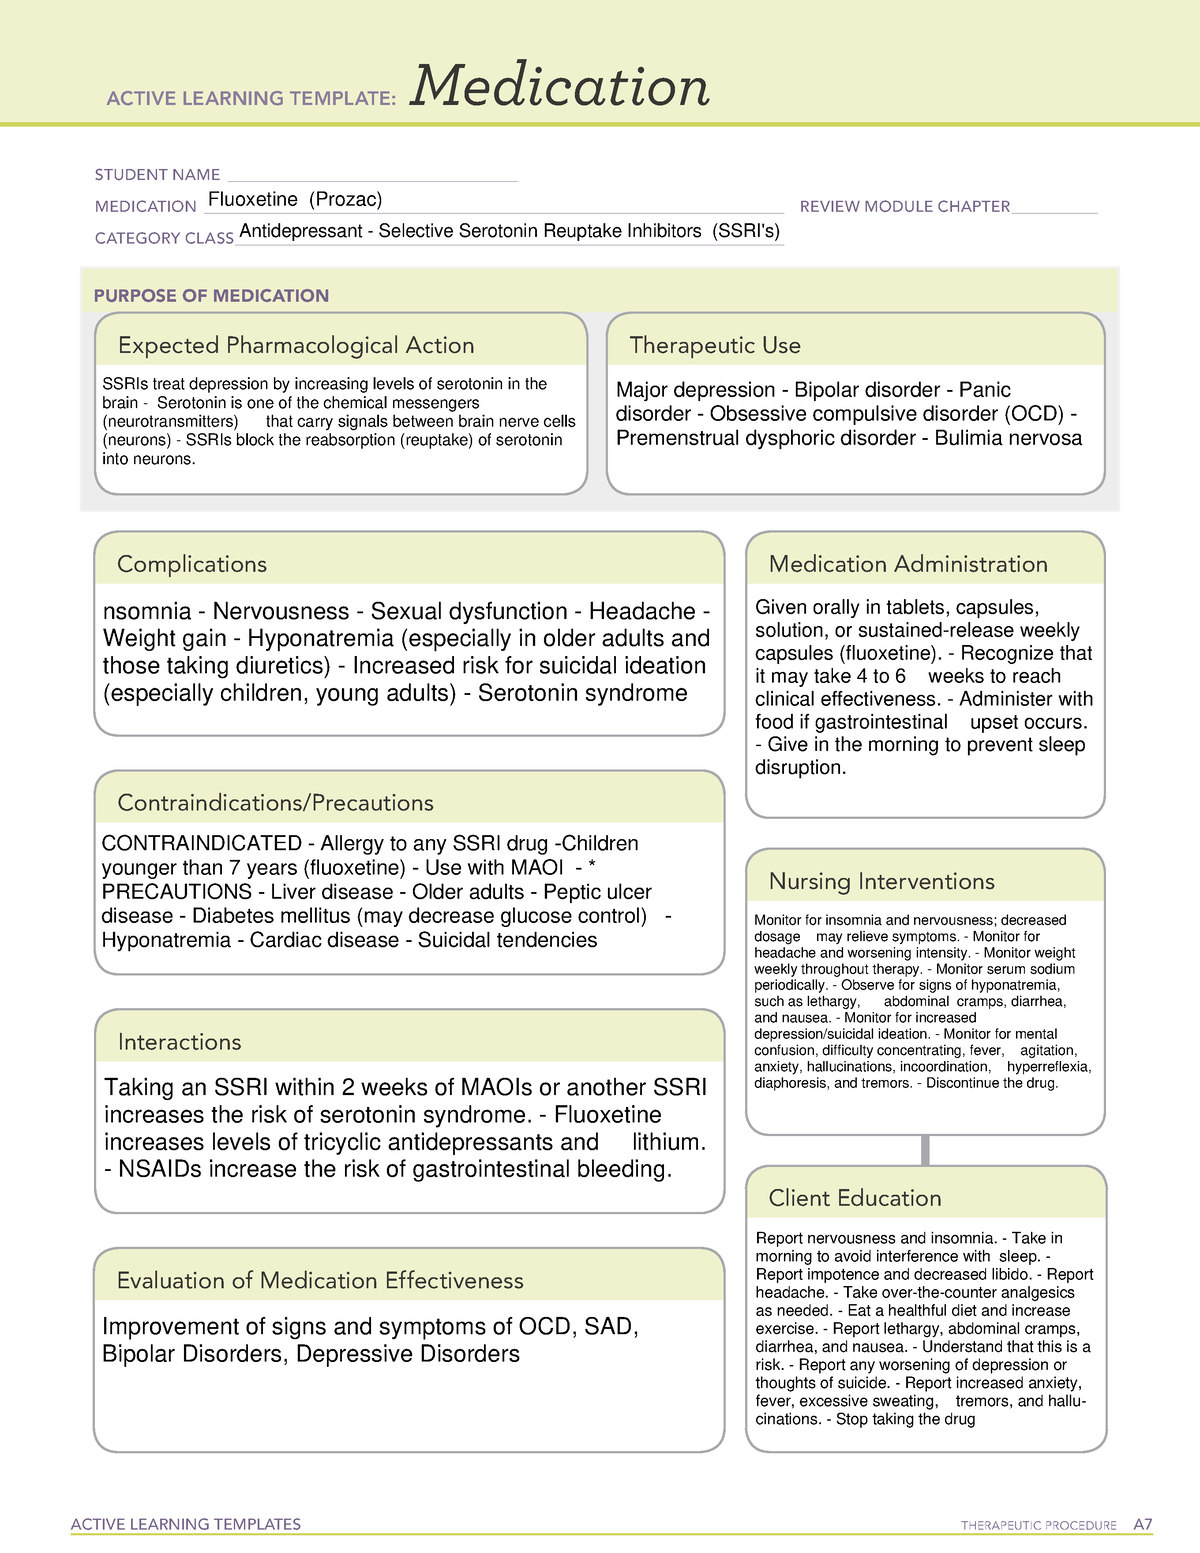 ATI Fluoxetine Medication Sheet ACTIVE LEARNING TEMPLATES